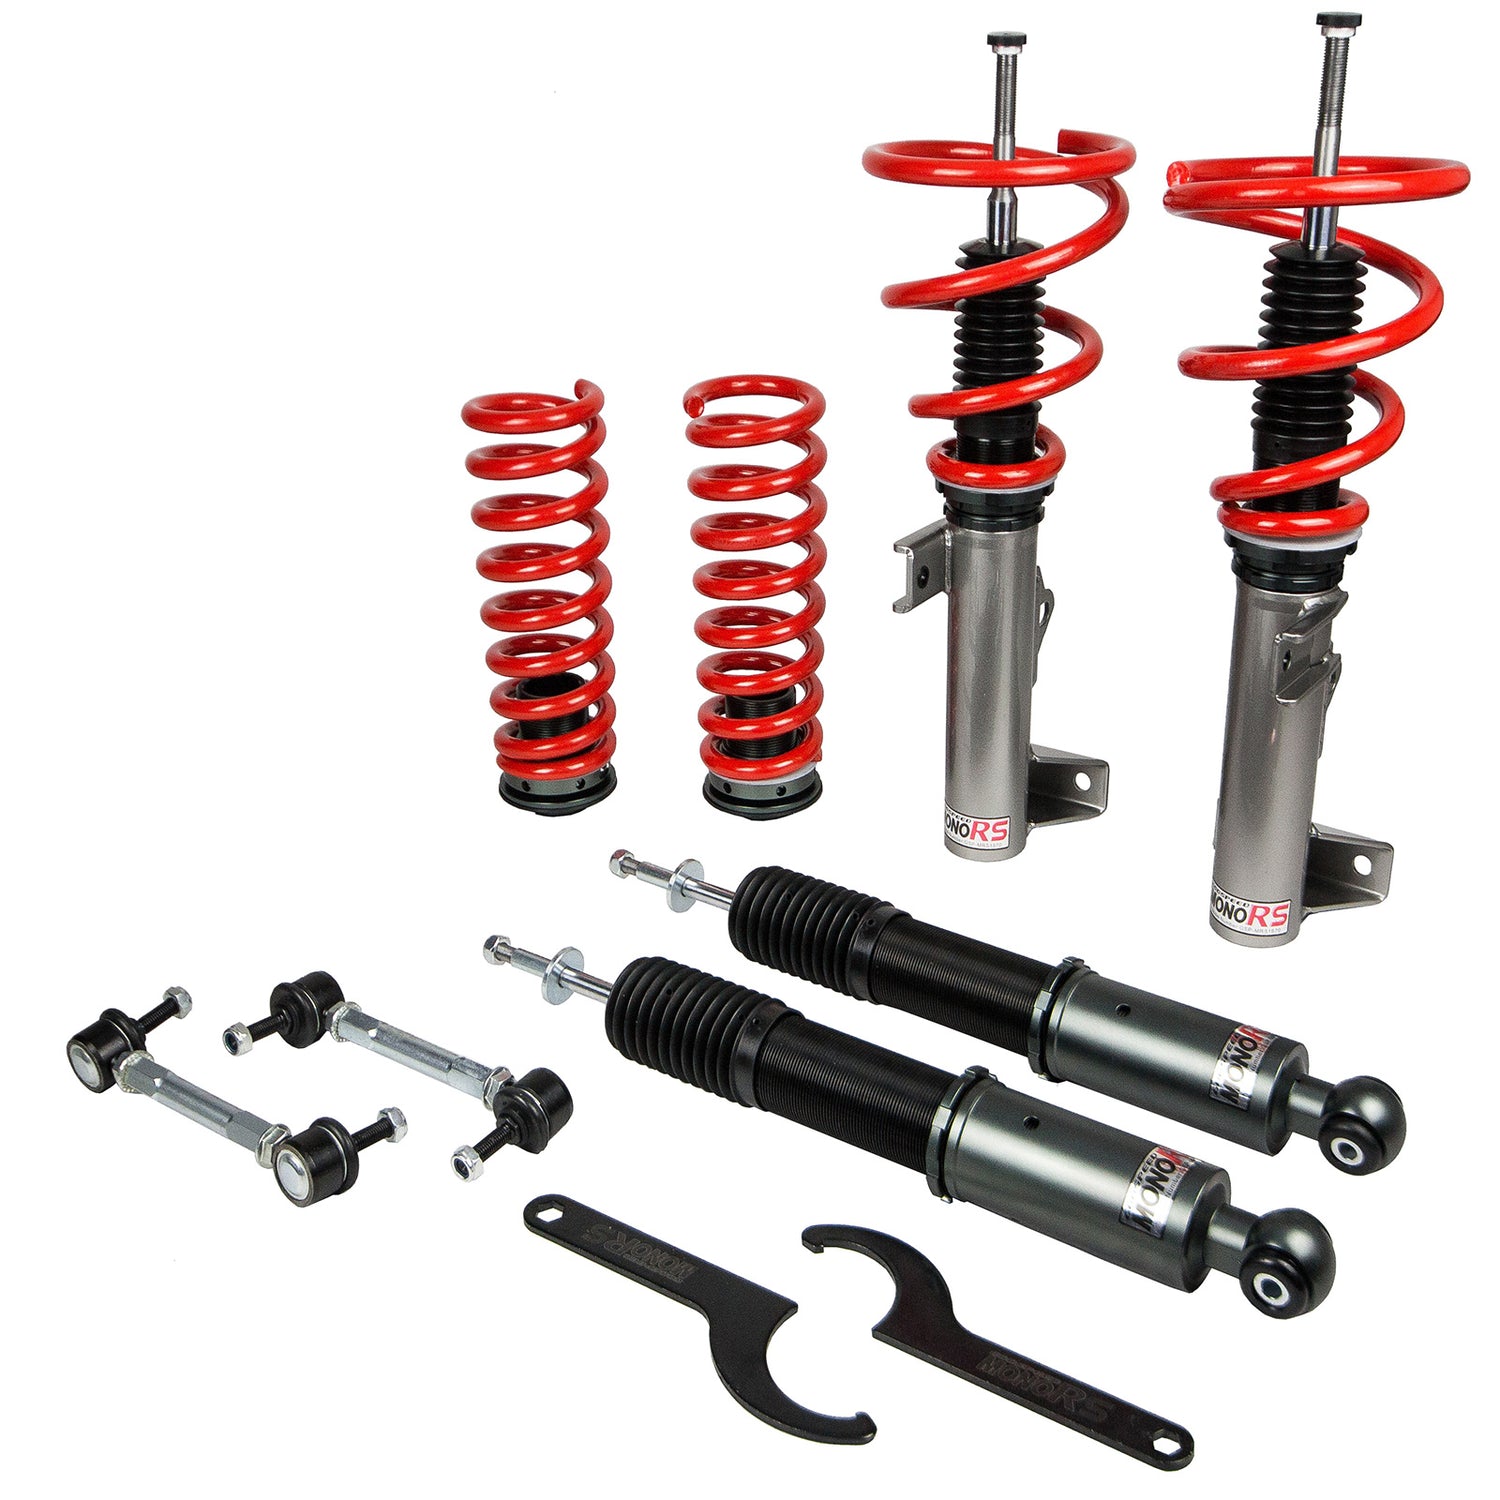 Godspeed MRS1870-B MonoRS Coilover Lowering Kit, 32 Damping Adjustment, Ride Height Adjustable